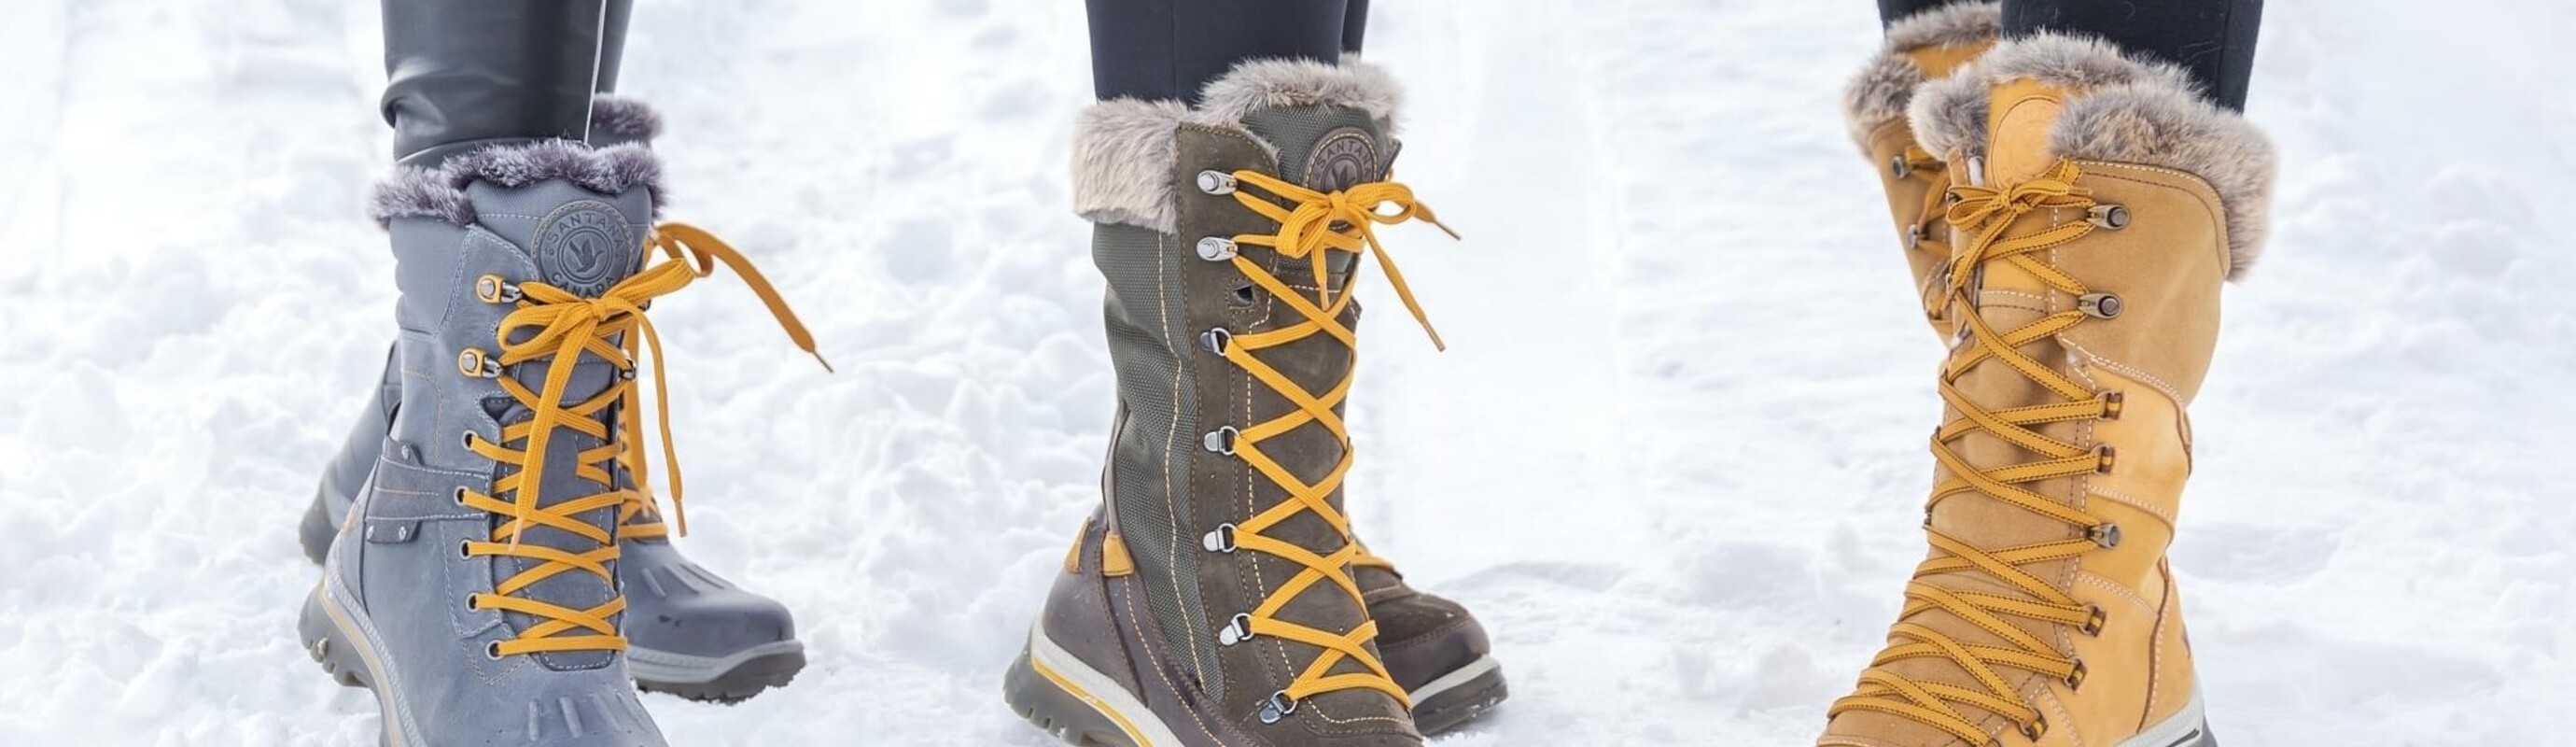 Your New Snow Boots Await!